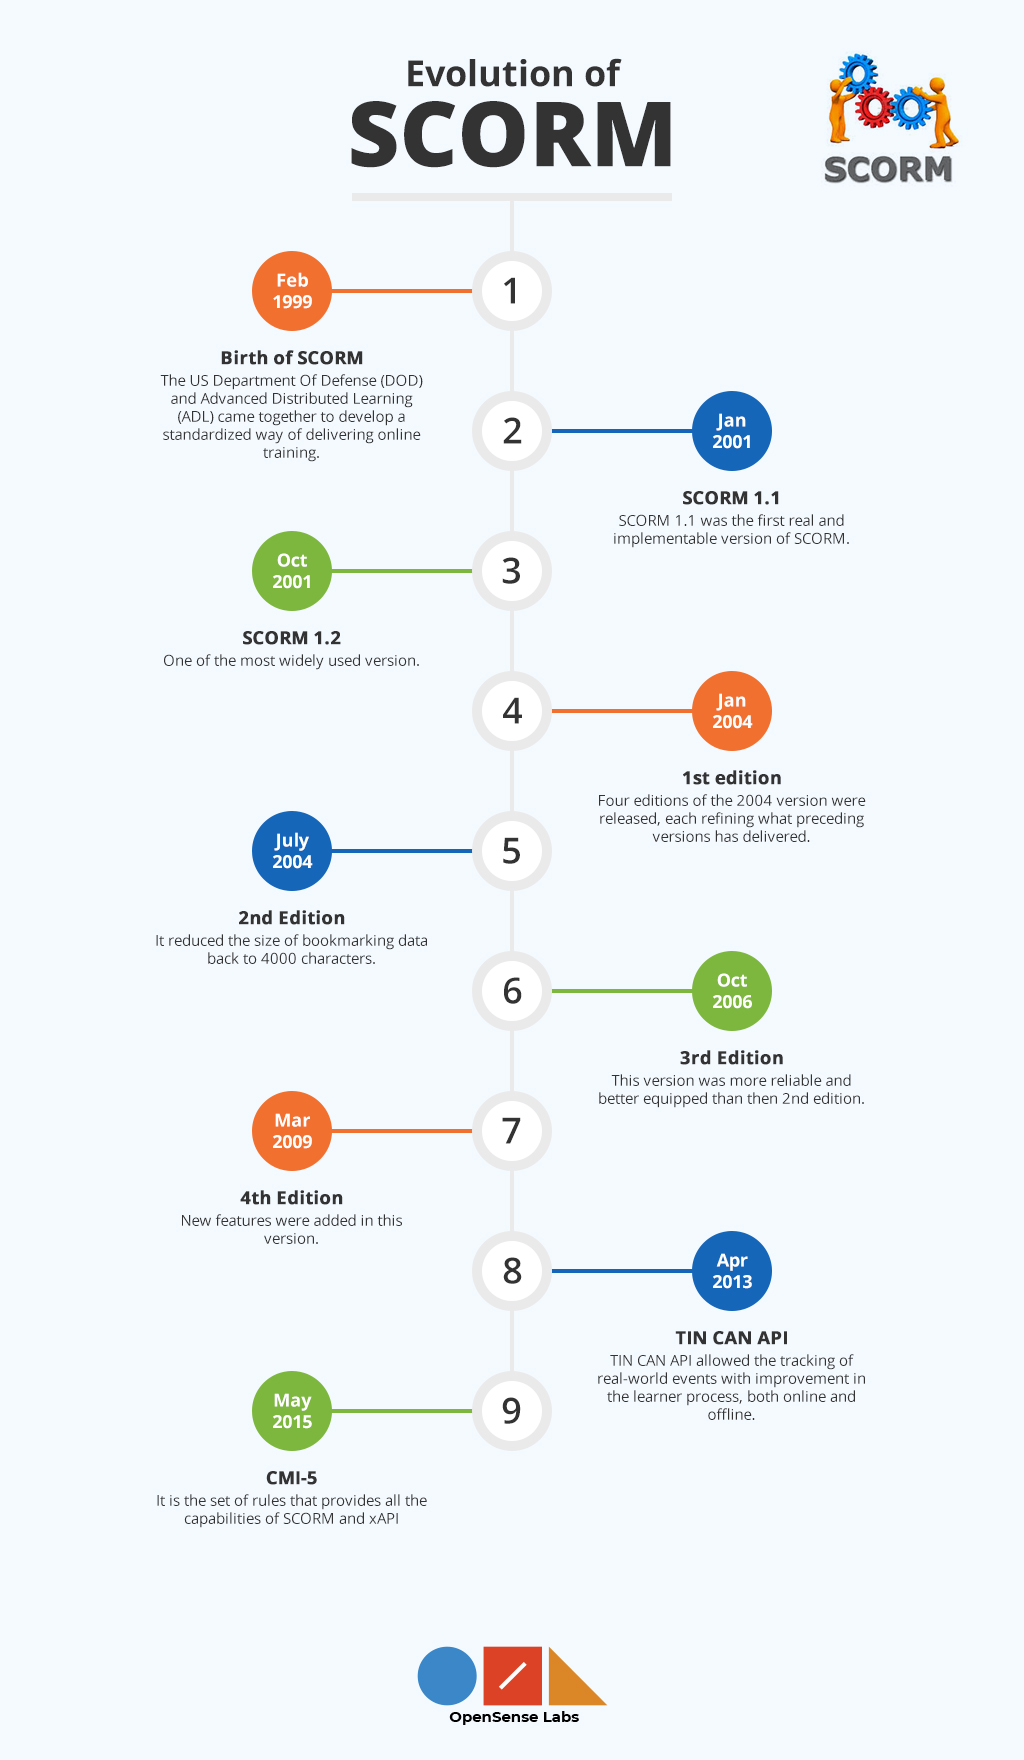  Infographic on the evolution of SCORM